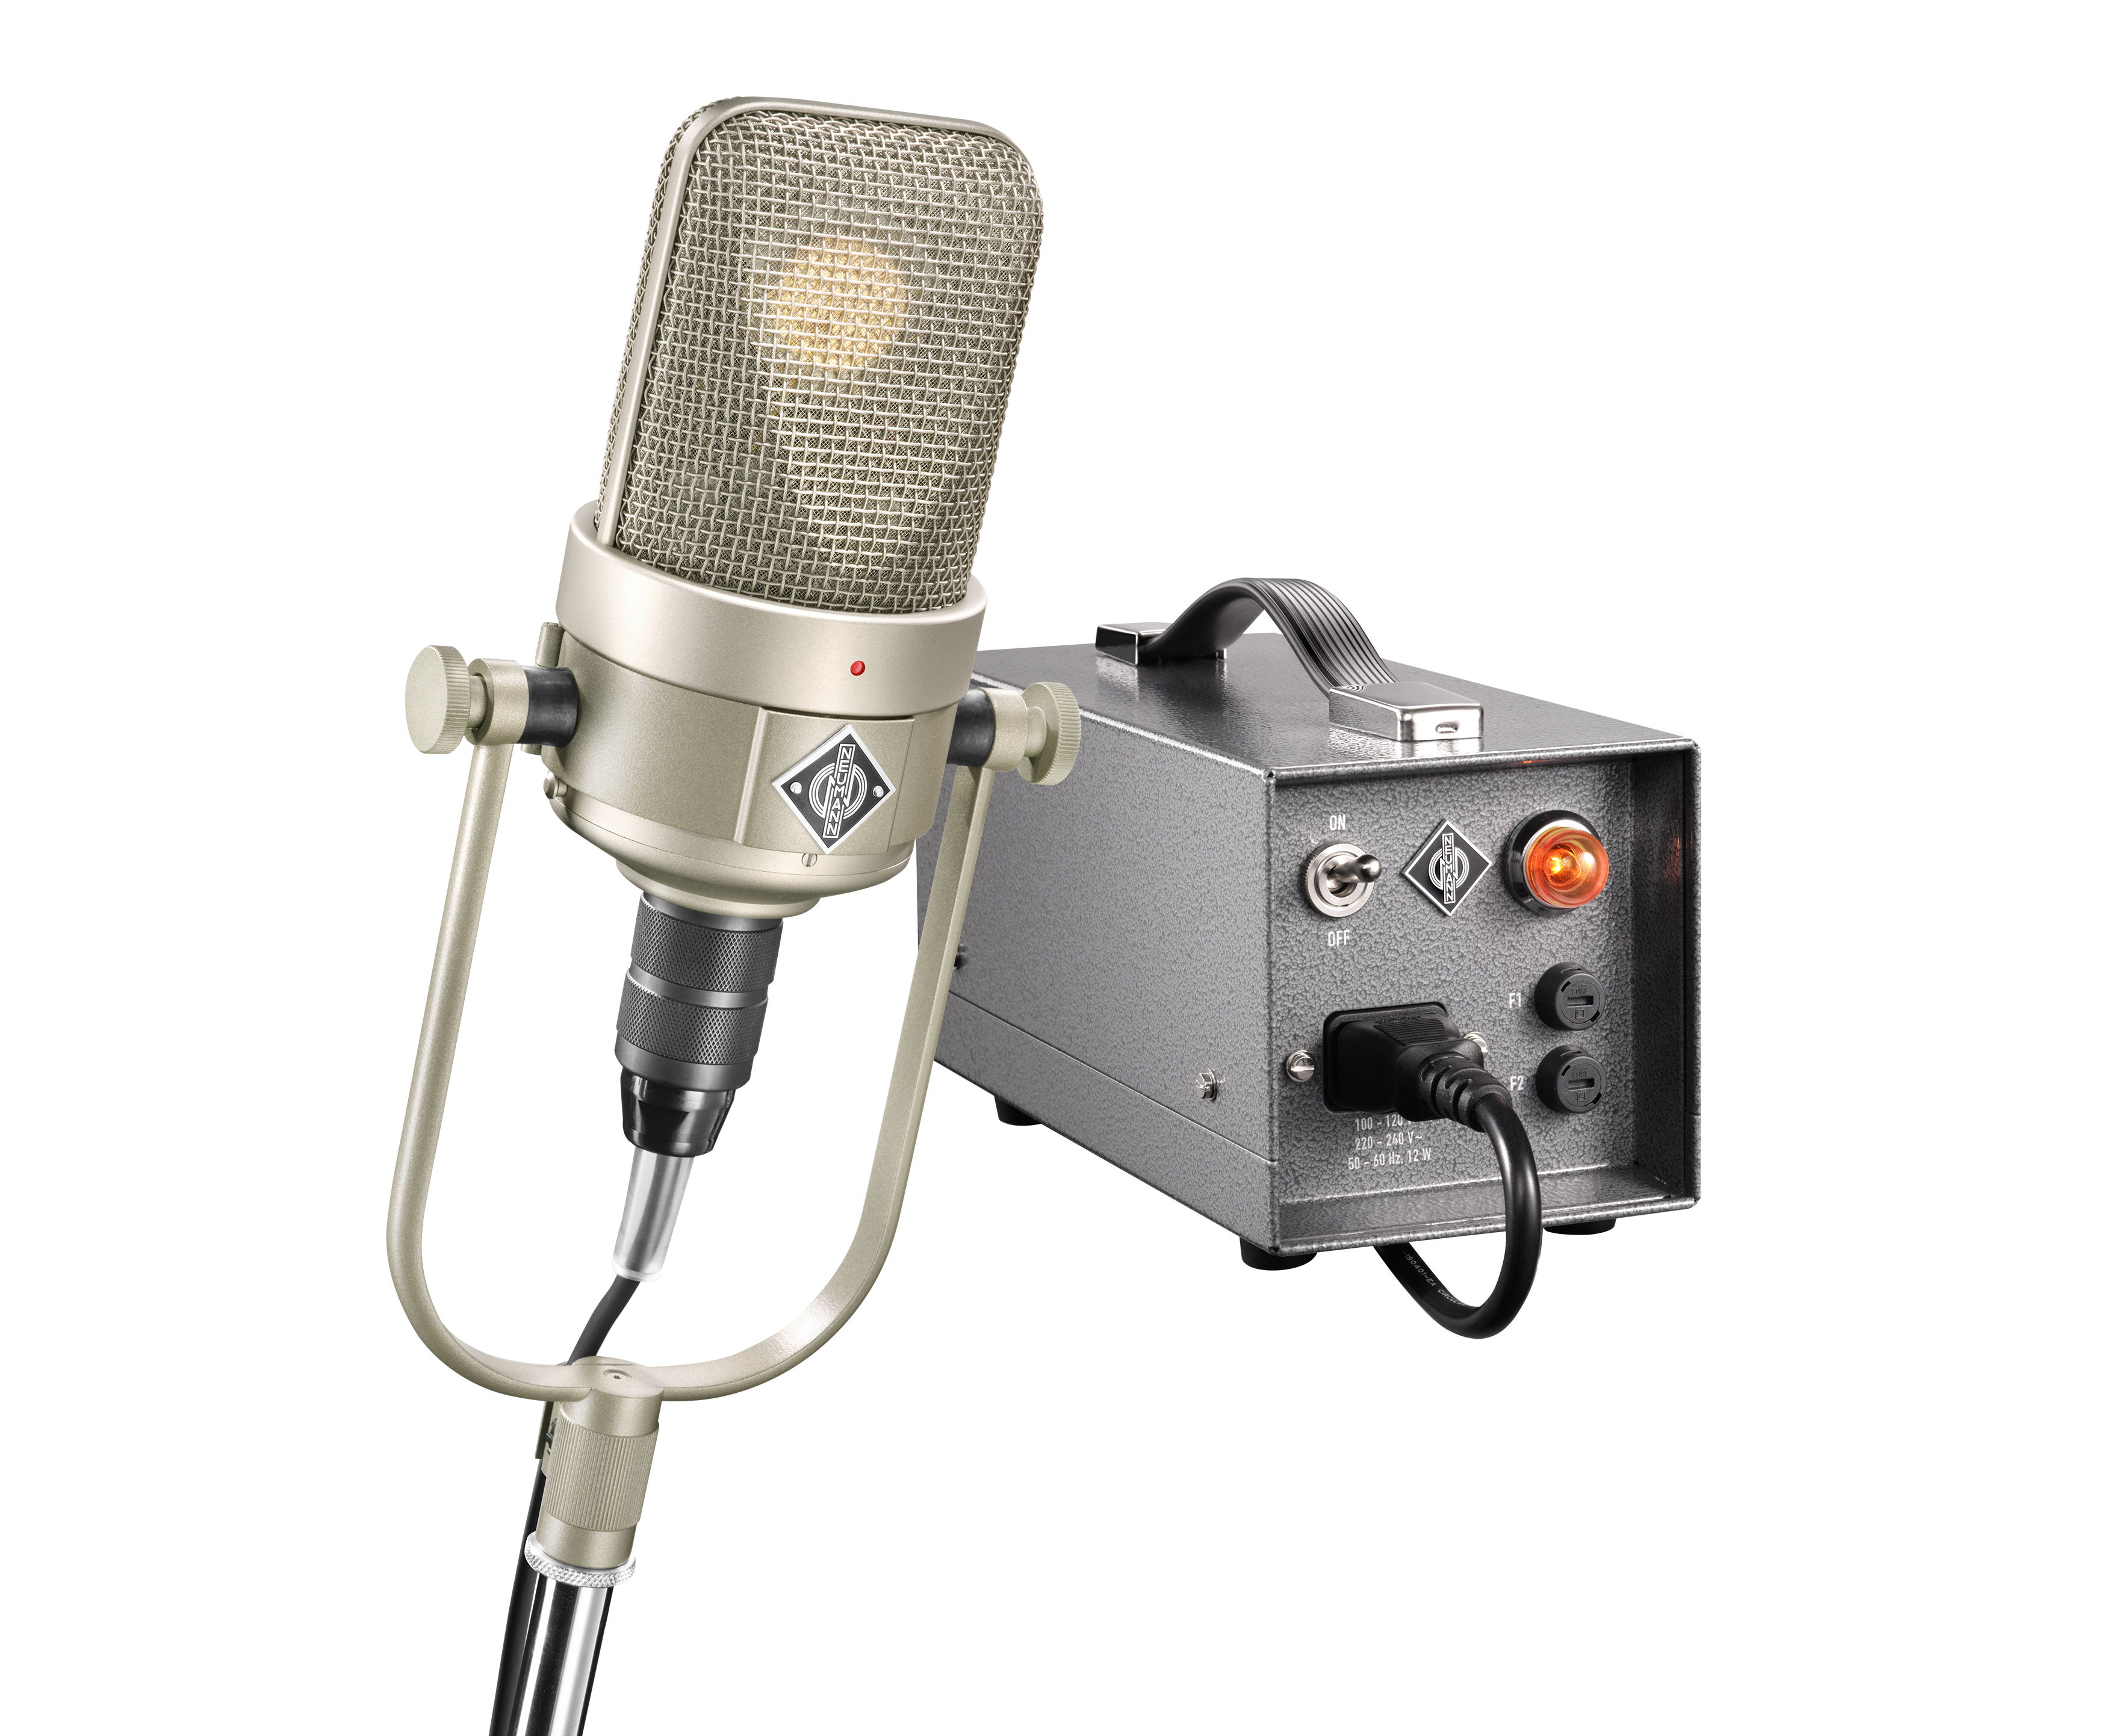 The M 49 V Tube Microphone Set won the TEC Award for Microphones – Recording, a fitting honor after its predecessor the M 49 was honored in the TEC Hall of Fame.